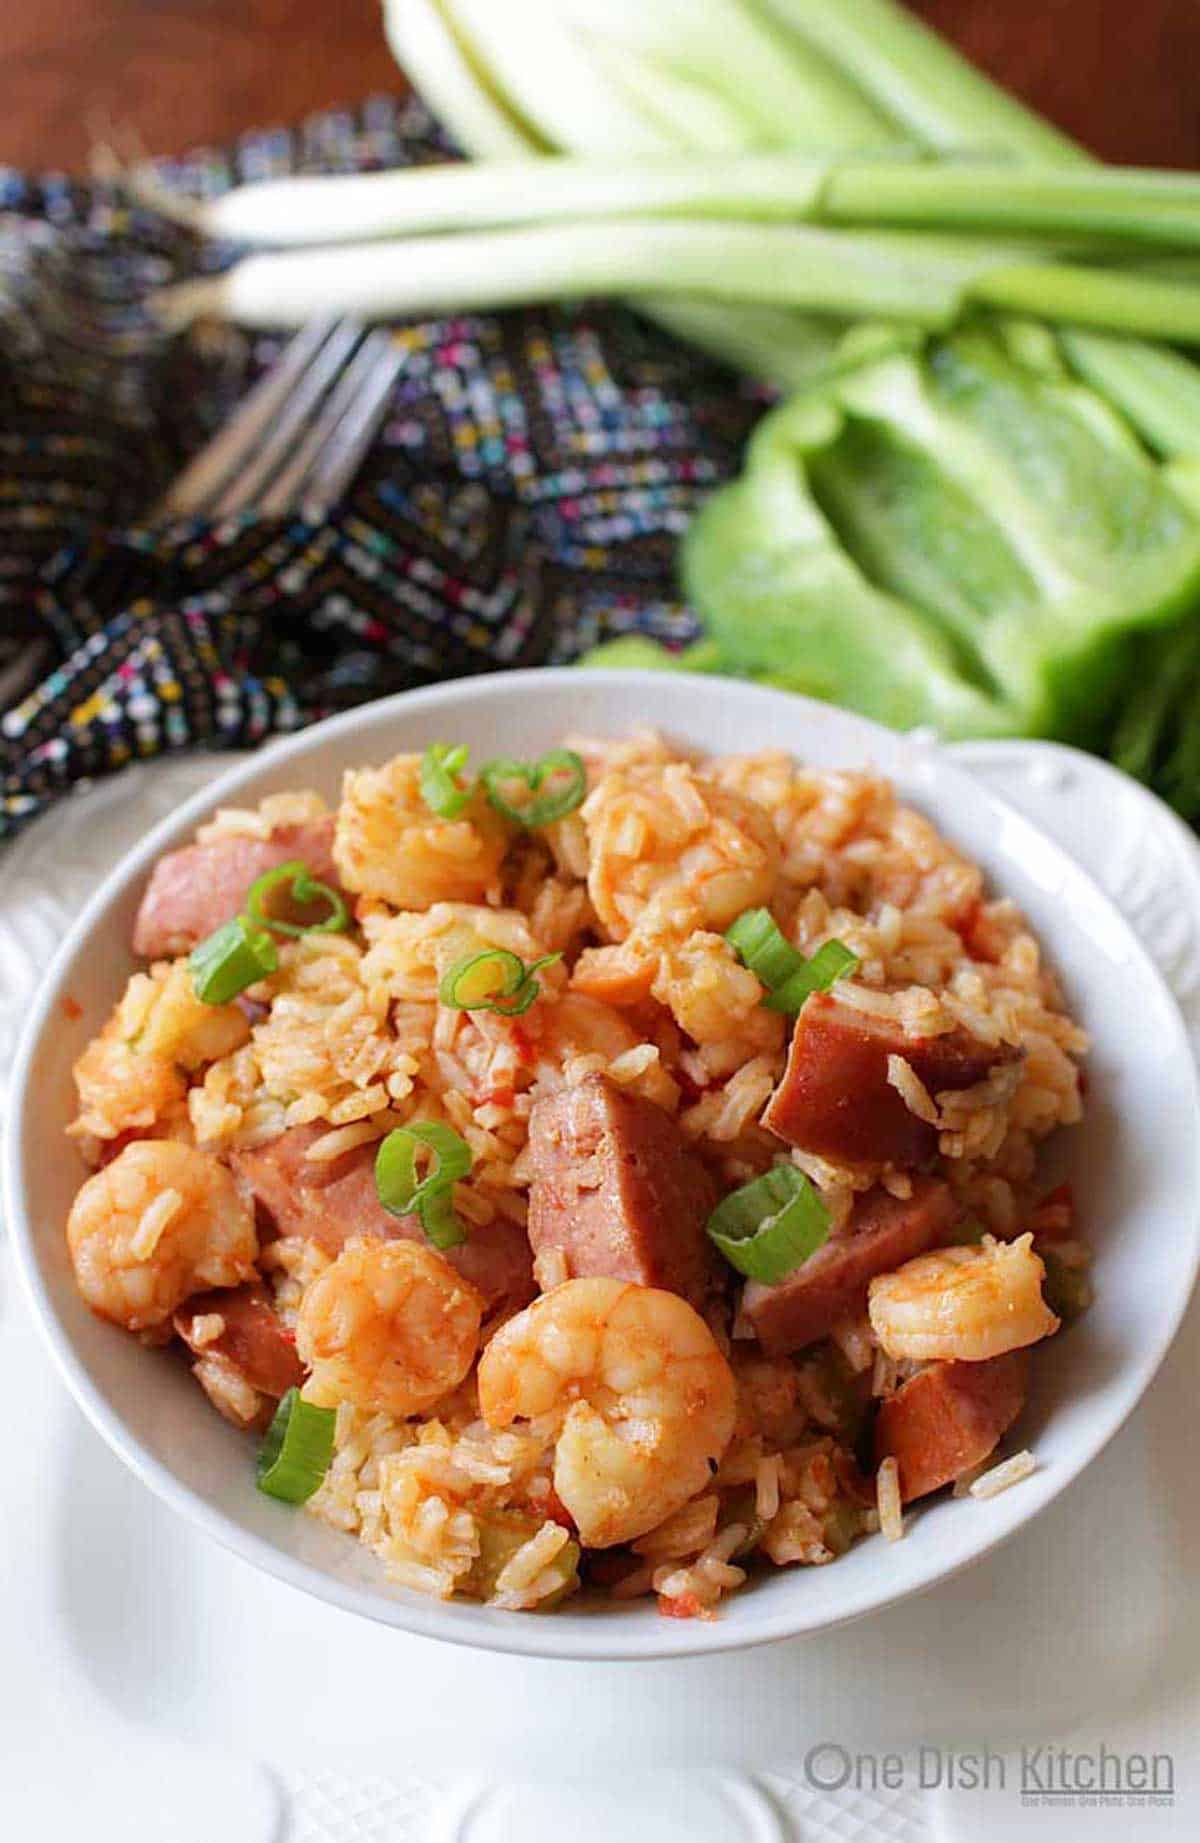 Shrimp and sausage jambalaya in a bowl with onions, celery, and green bell peppers in the background.